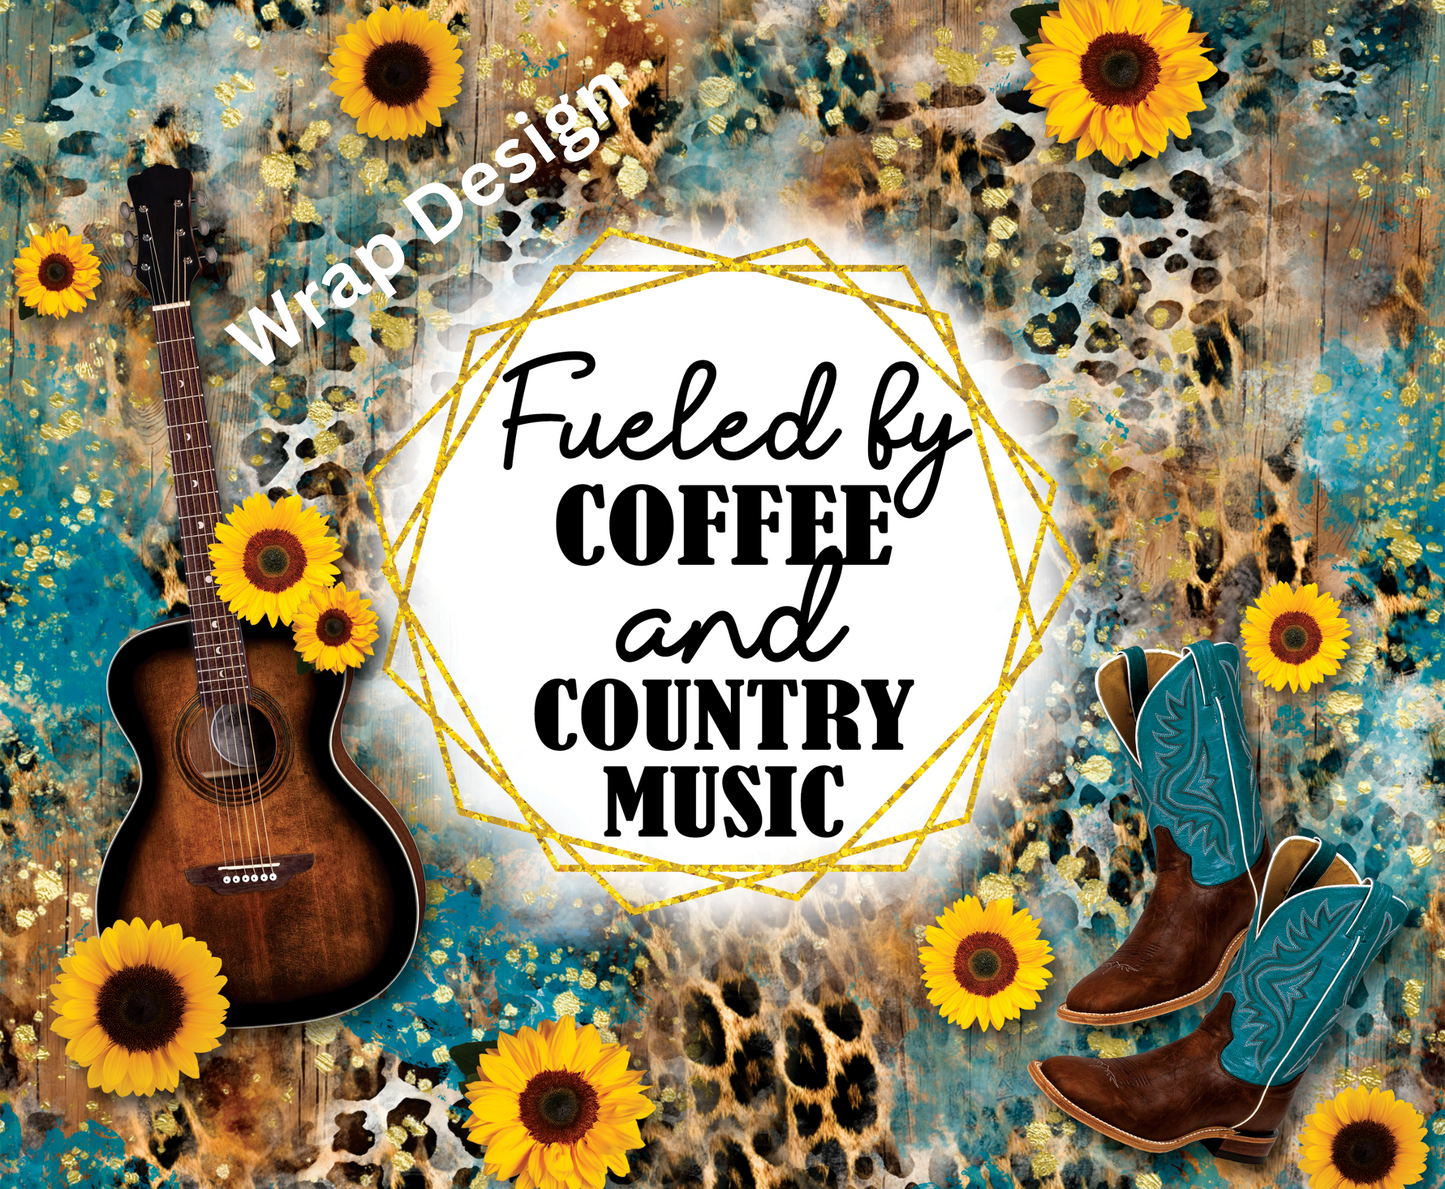 Fueled by coffee and country music 20oz tumbler  Wrap